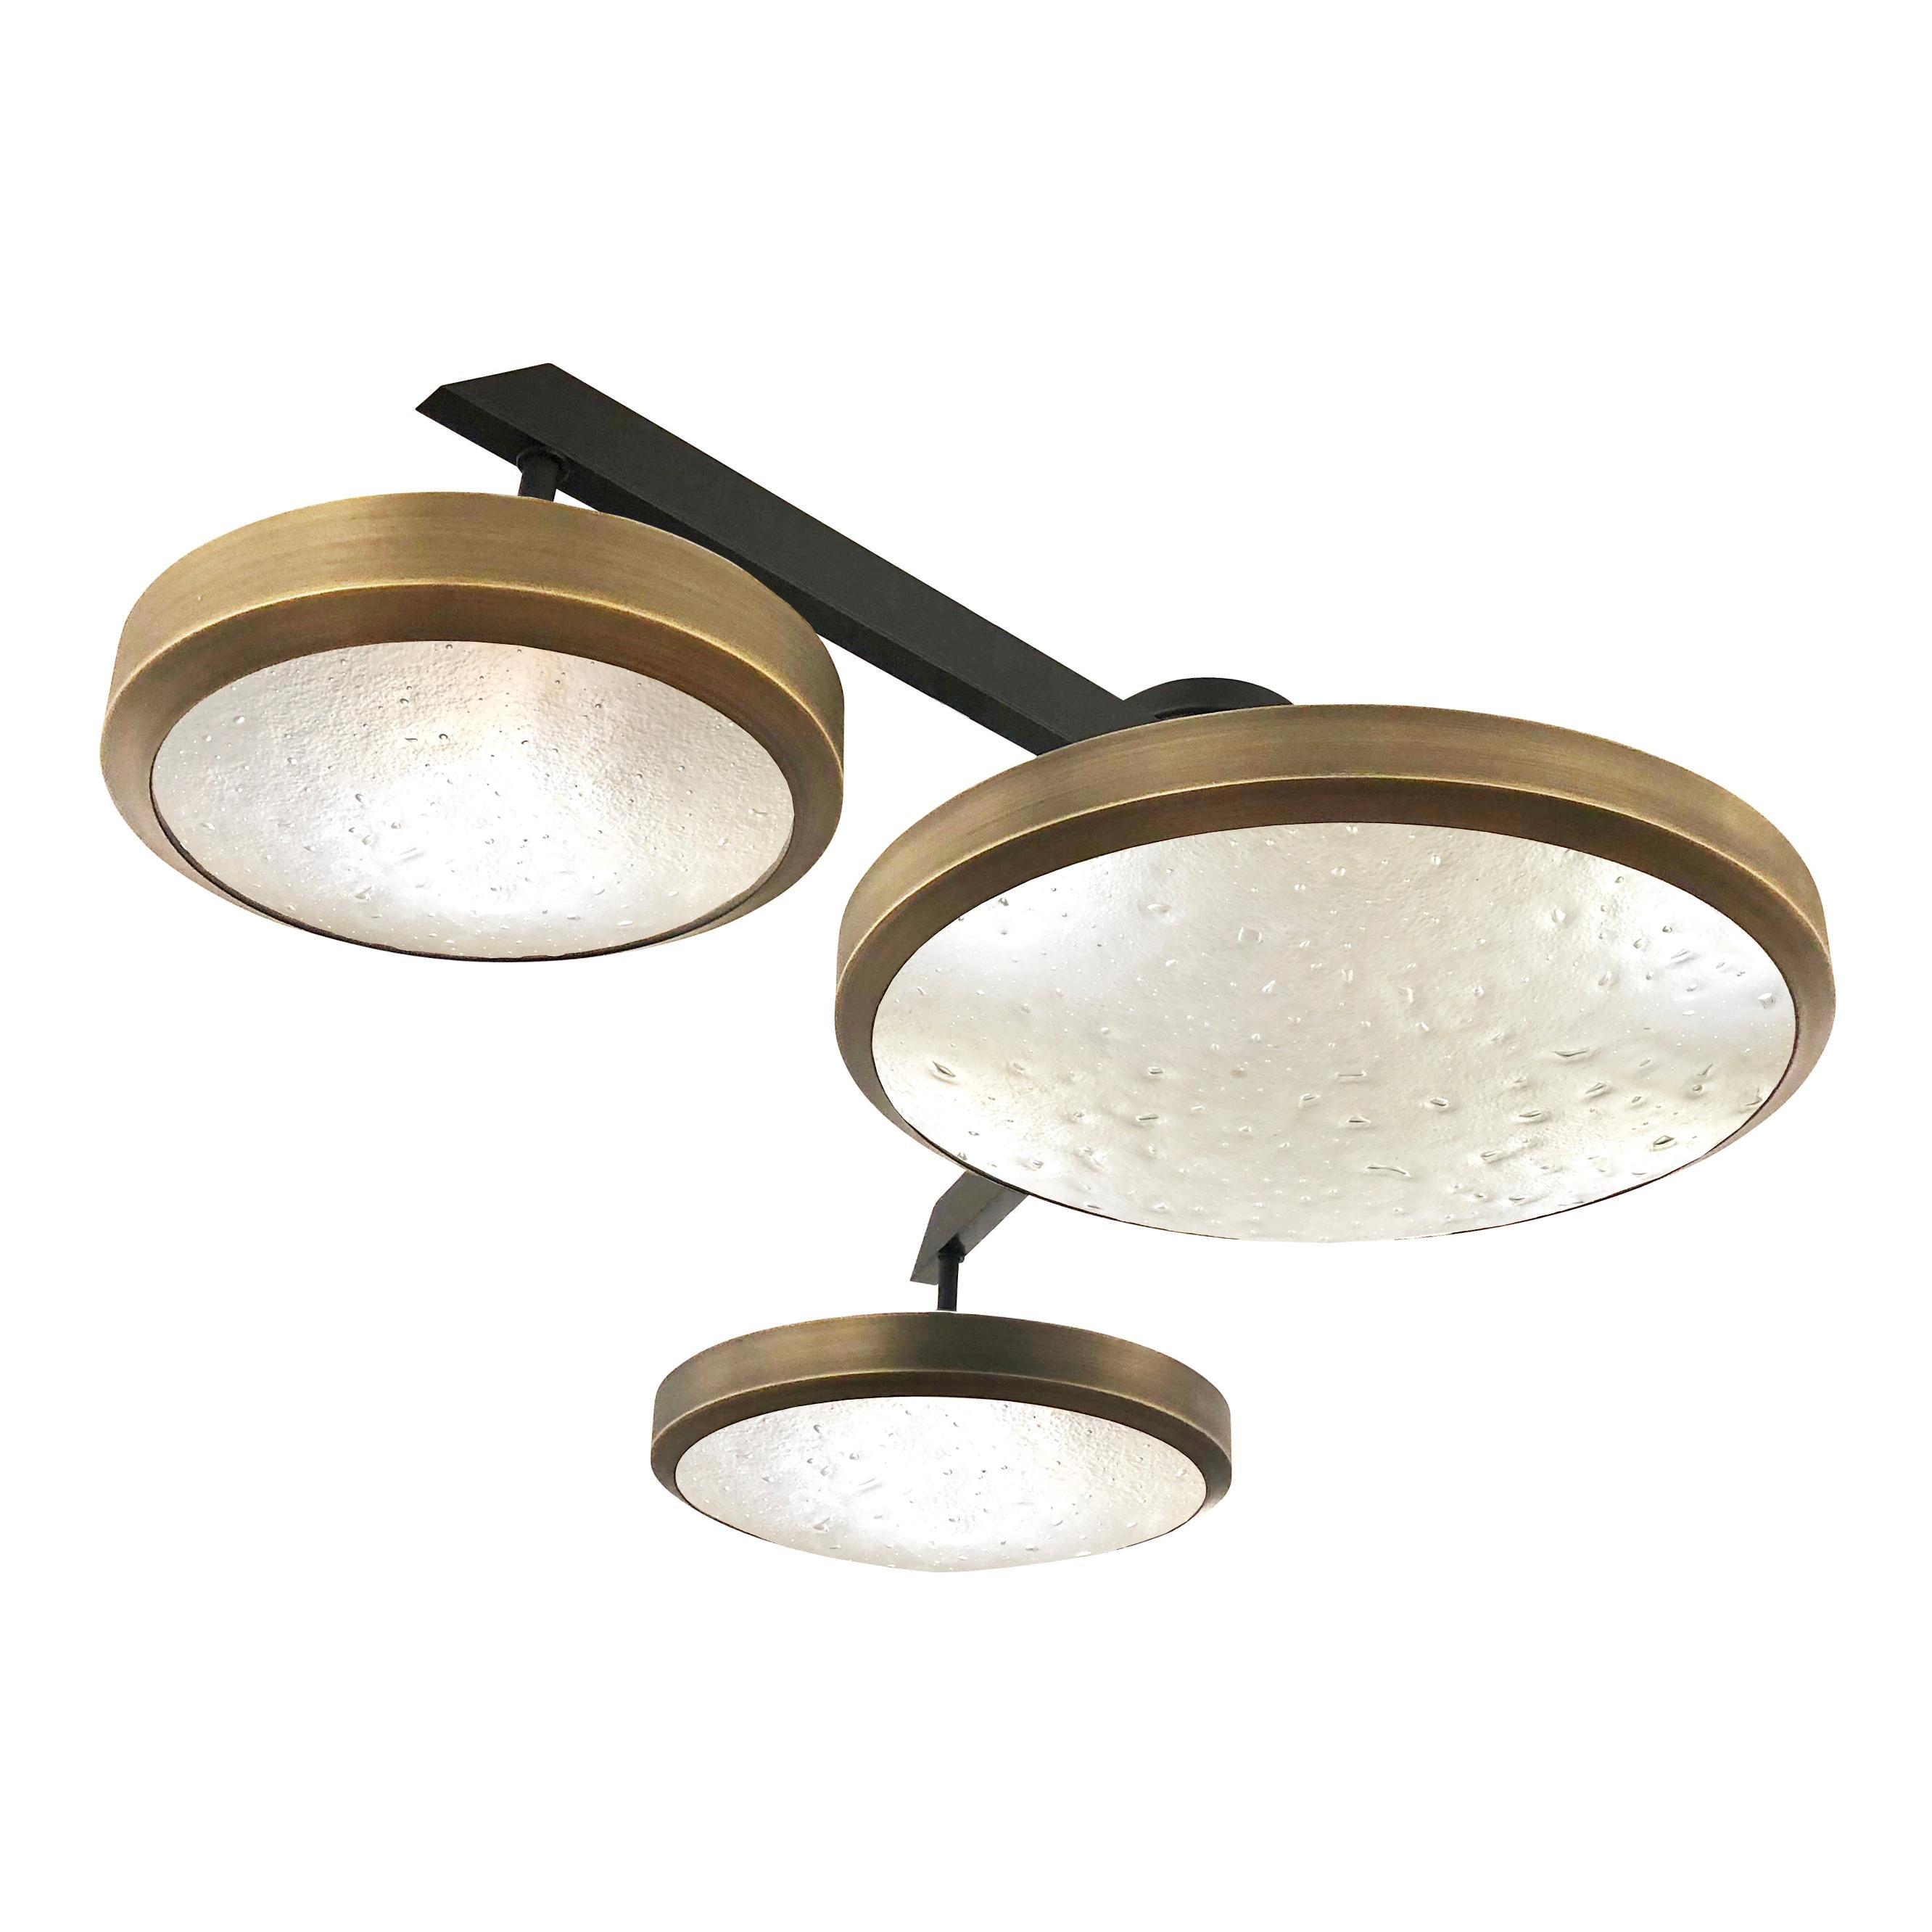 Zeta Ceiling Light by Gaspare Asaro- Two Tone Finish For Sale